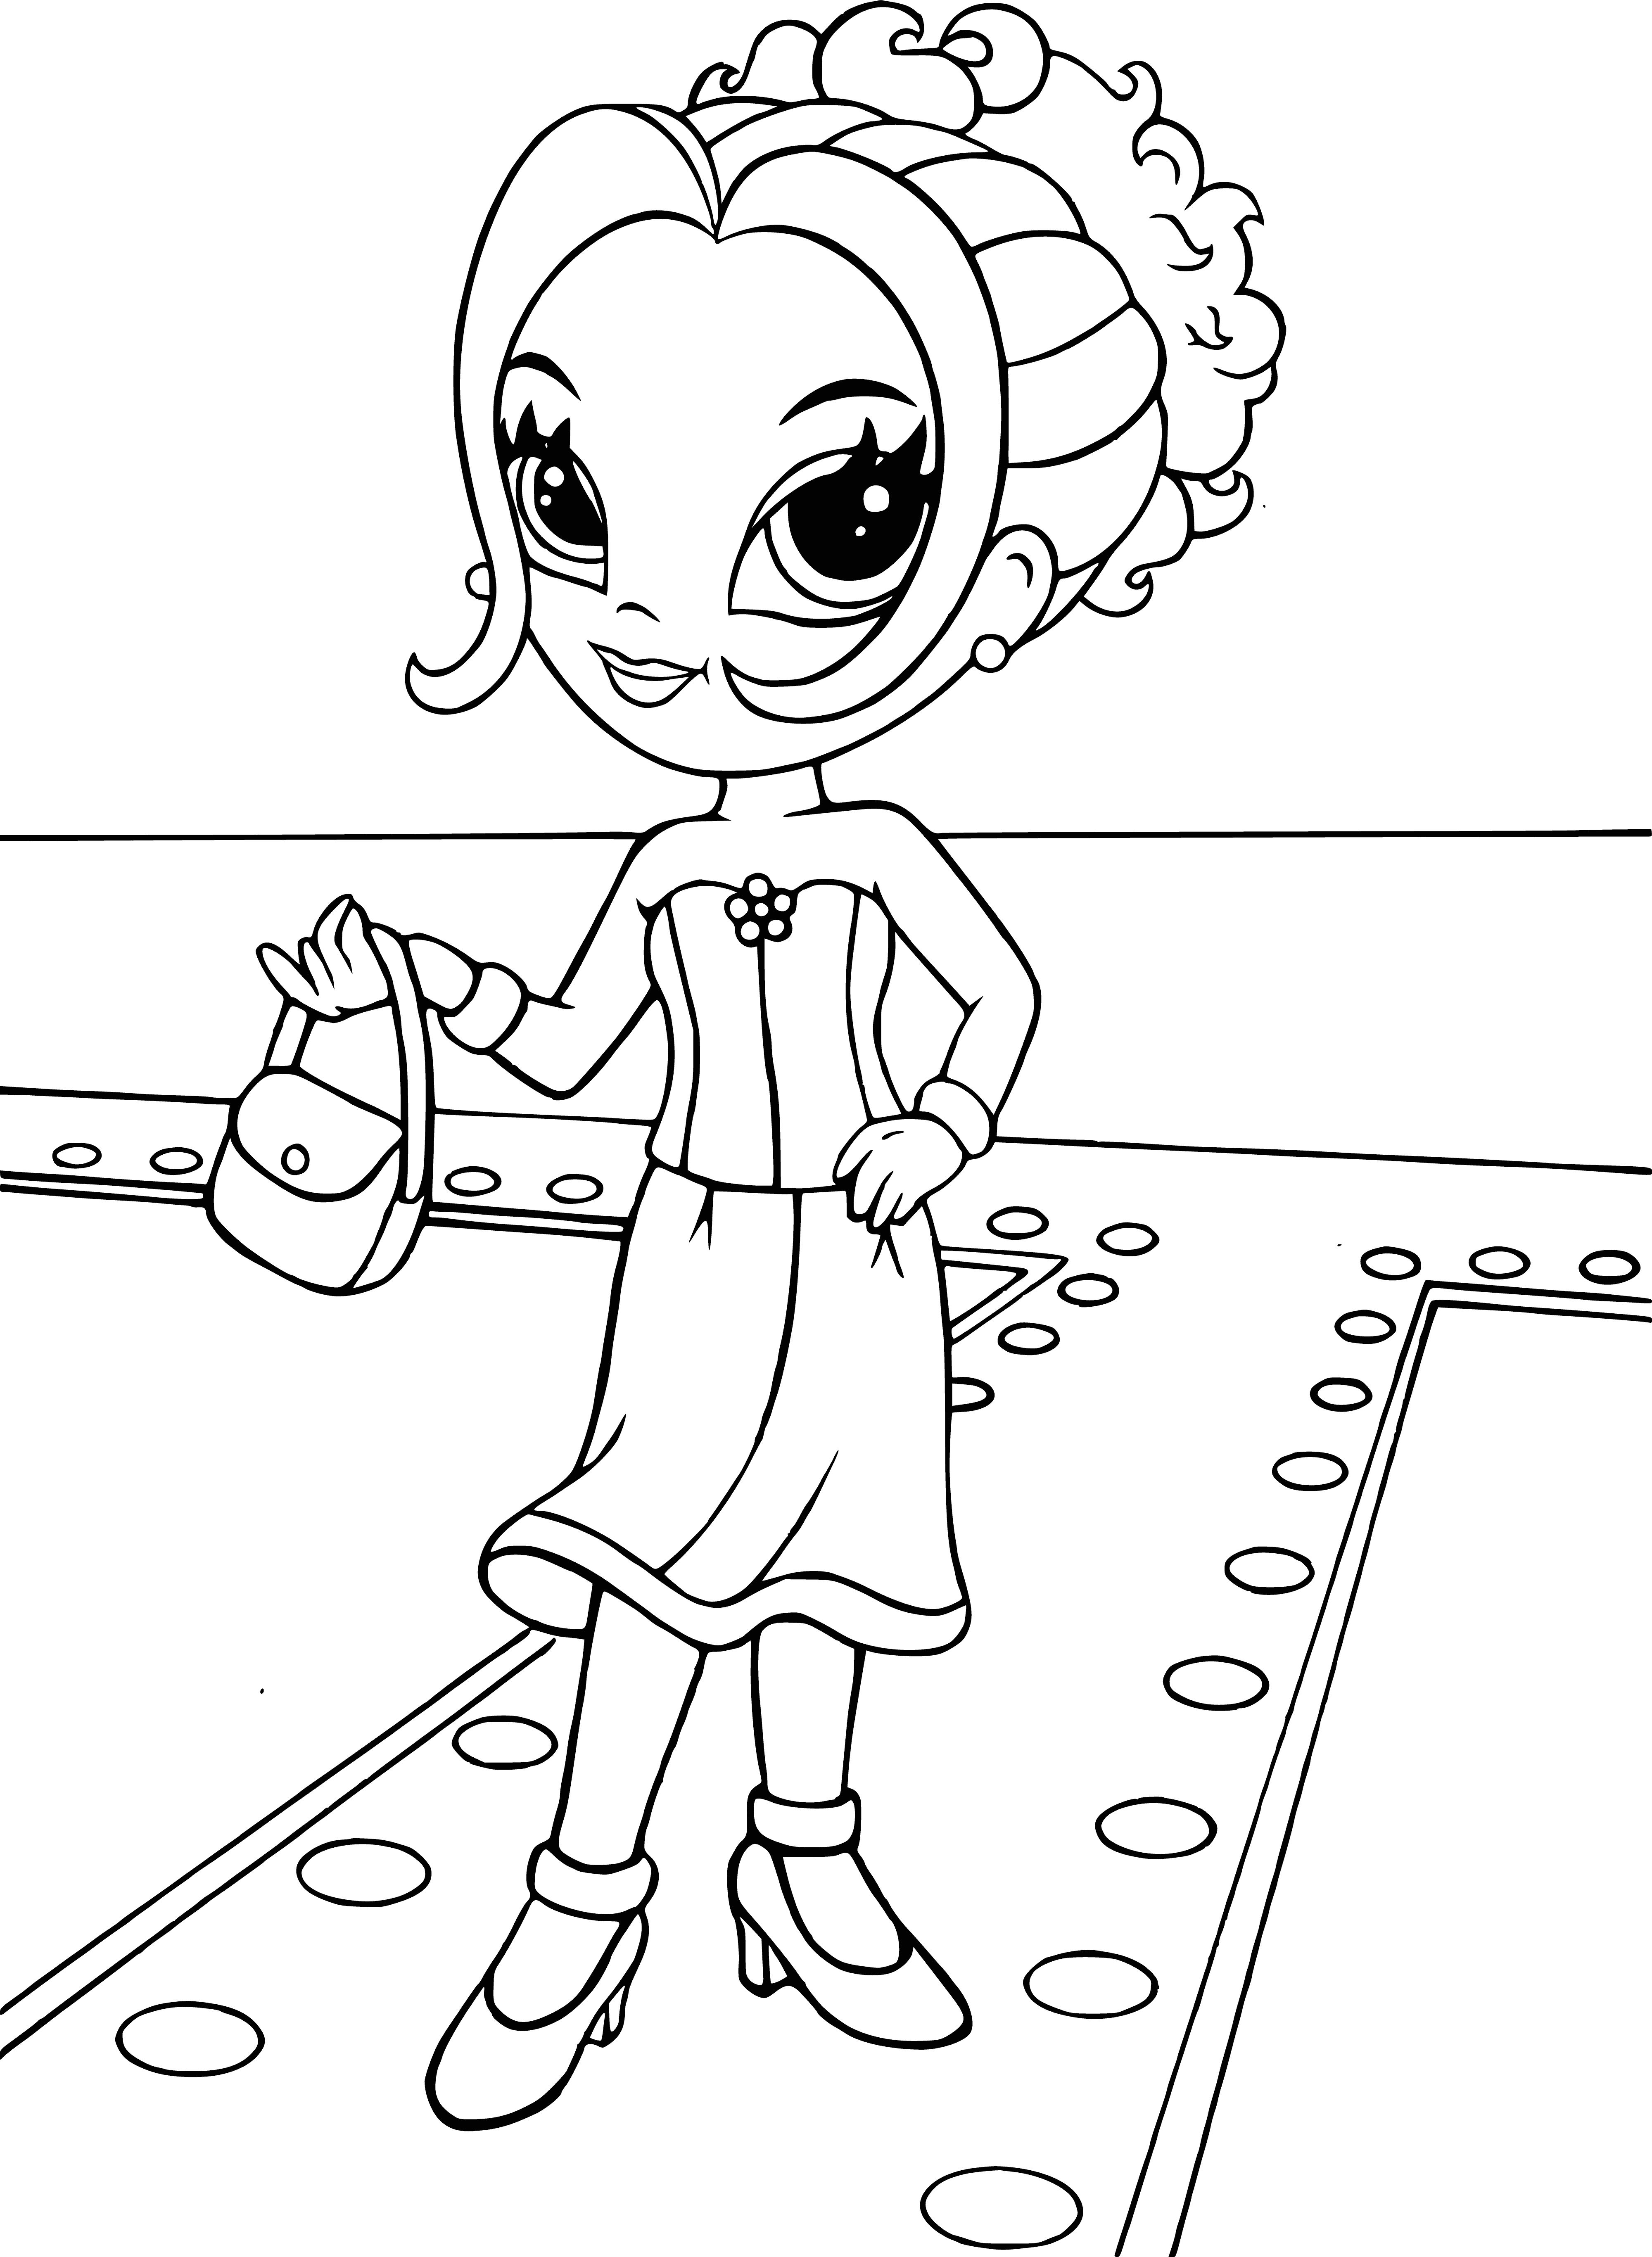 coloring page: Glam girl holds sparkly pink and gold "Lisa Frank Glamour Girl" sign, wearing pink dress with gold belt, pink and gold shoes. Blonde hair, blue eyes. #glamour